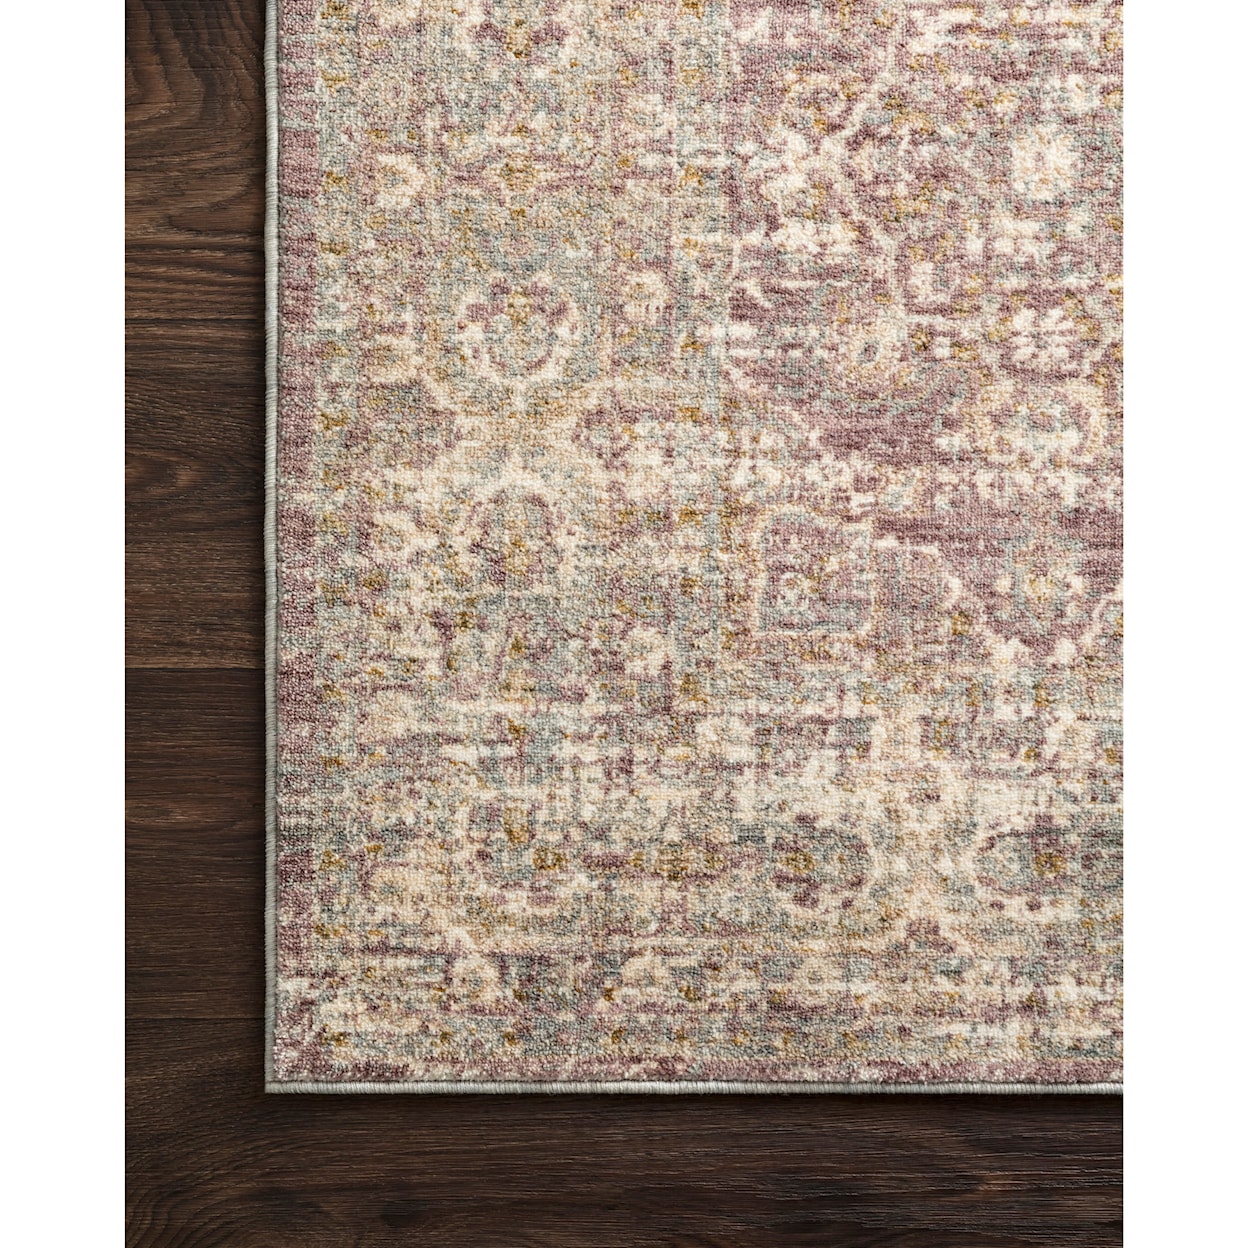 Reeds Rugs Revere 7'10" x 7'10" Round Lilac Rug